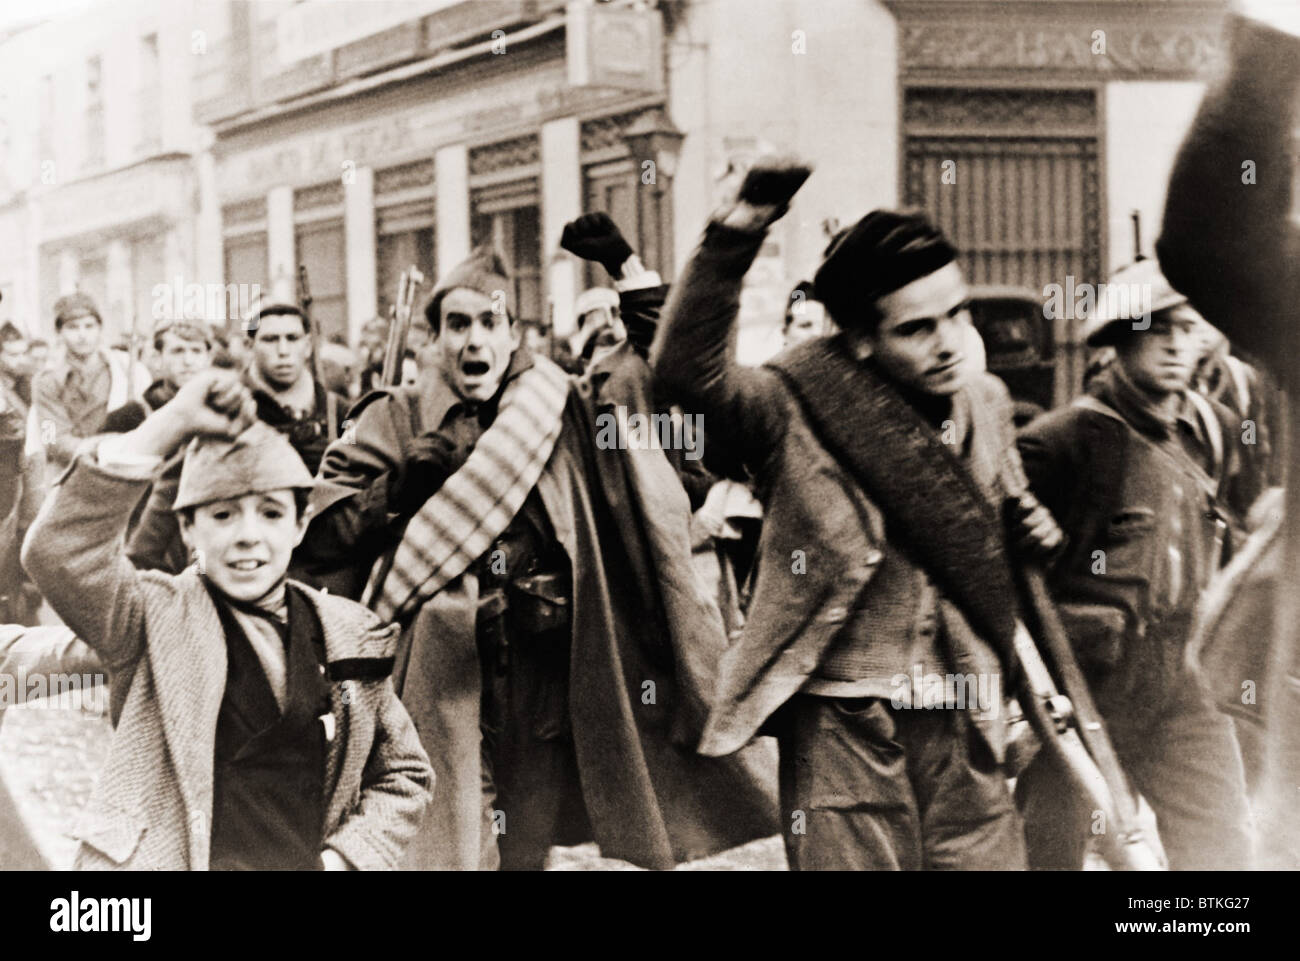 Battalion of Republican (anti-Franco) shock troops marching in ...